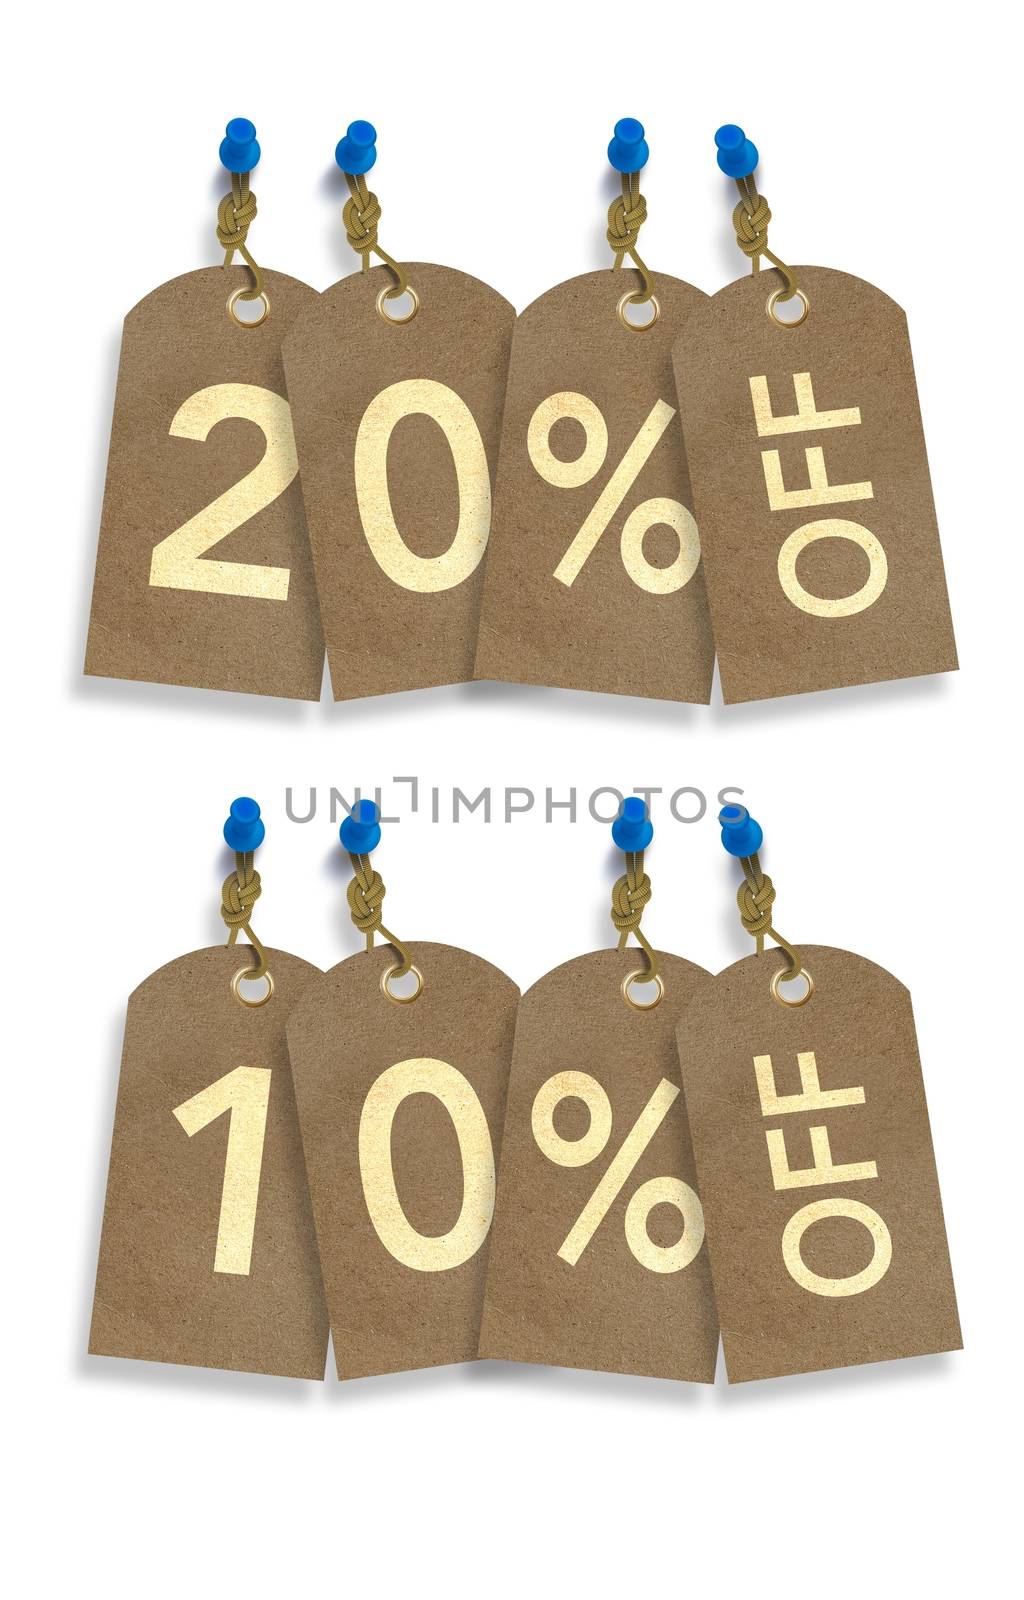 Special Sale Paper Tags by welcomia